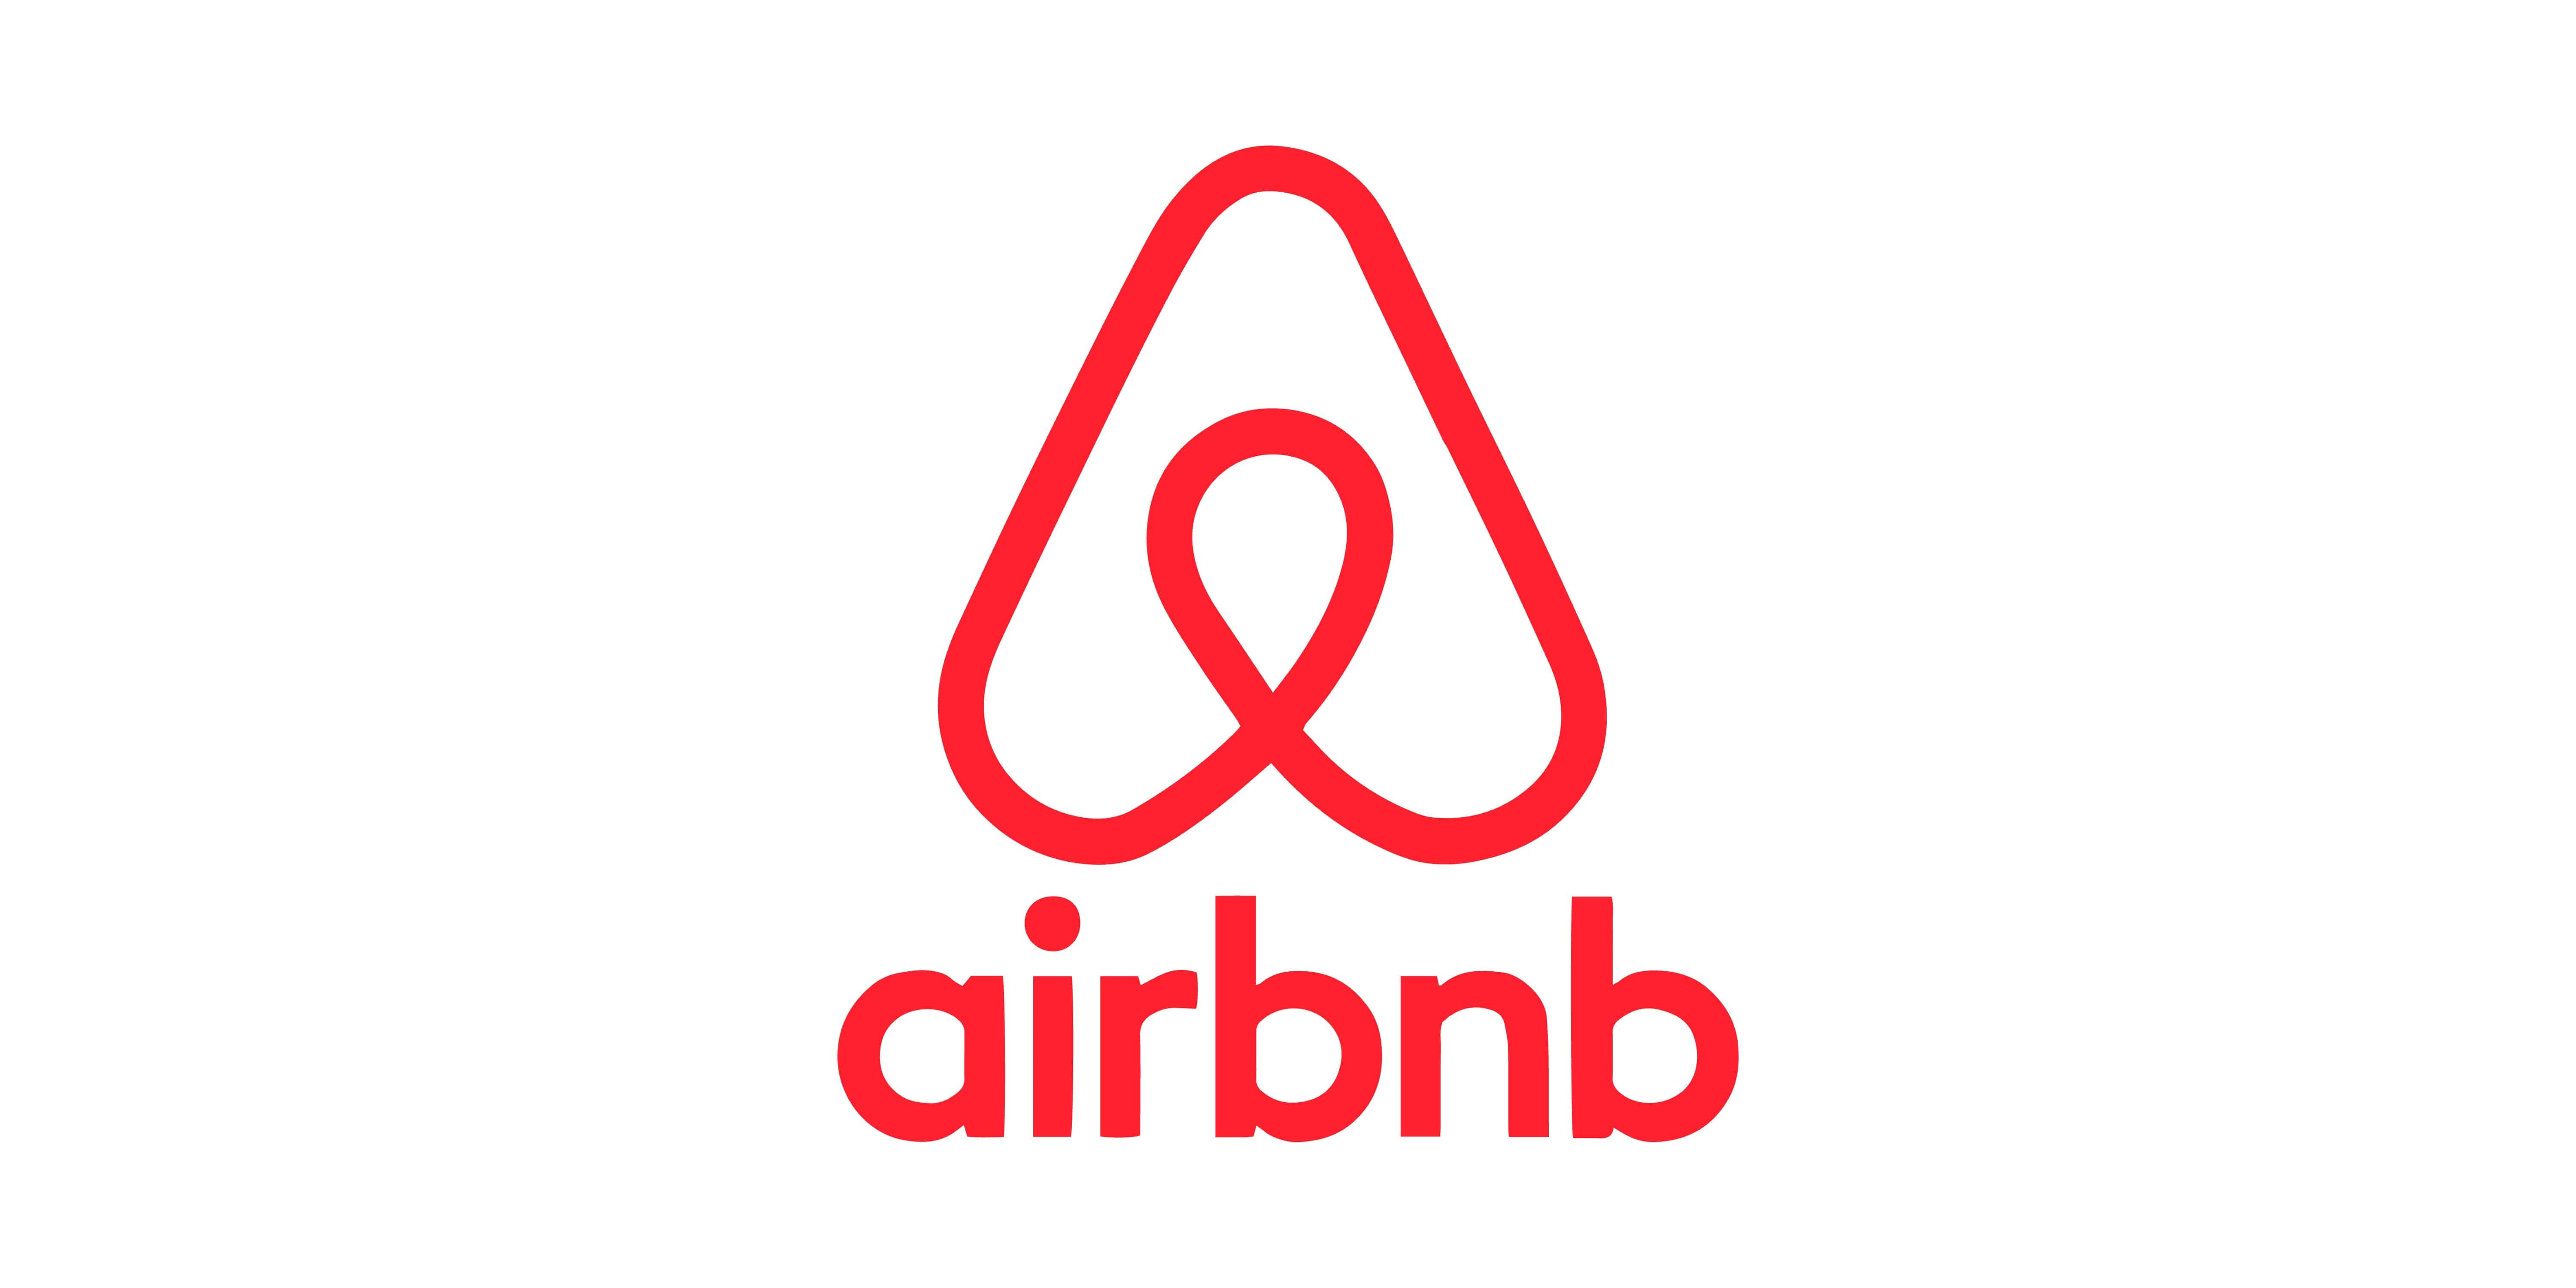 Making money on Airbnb